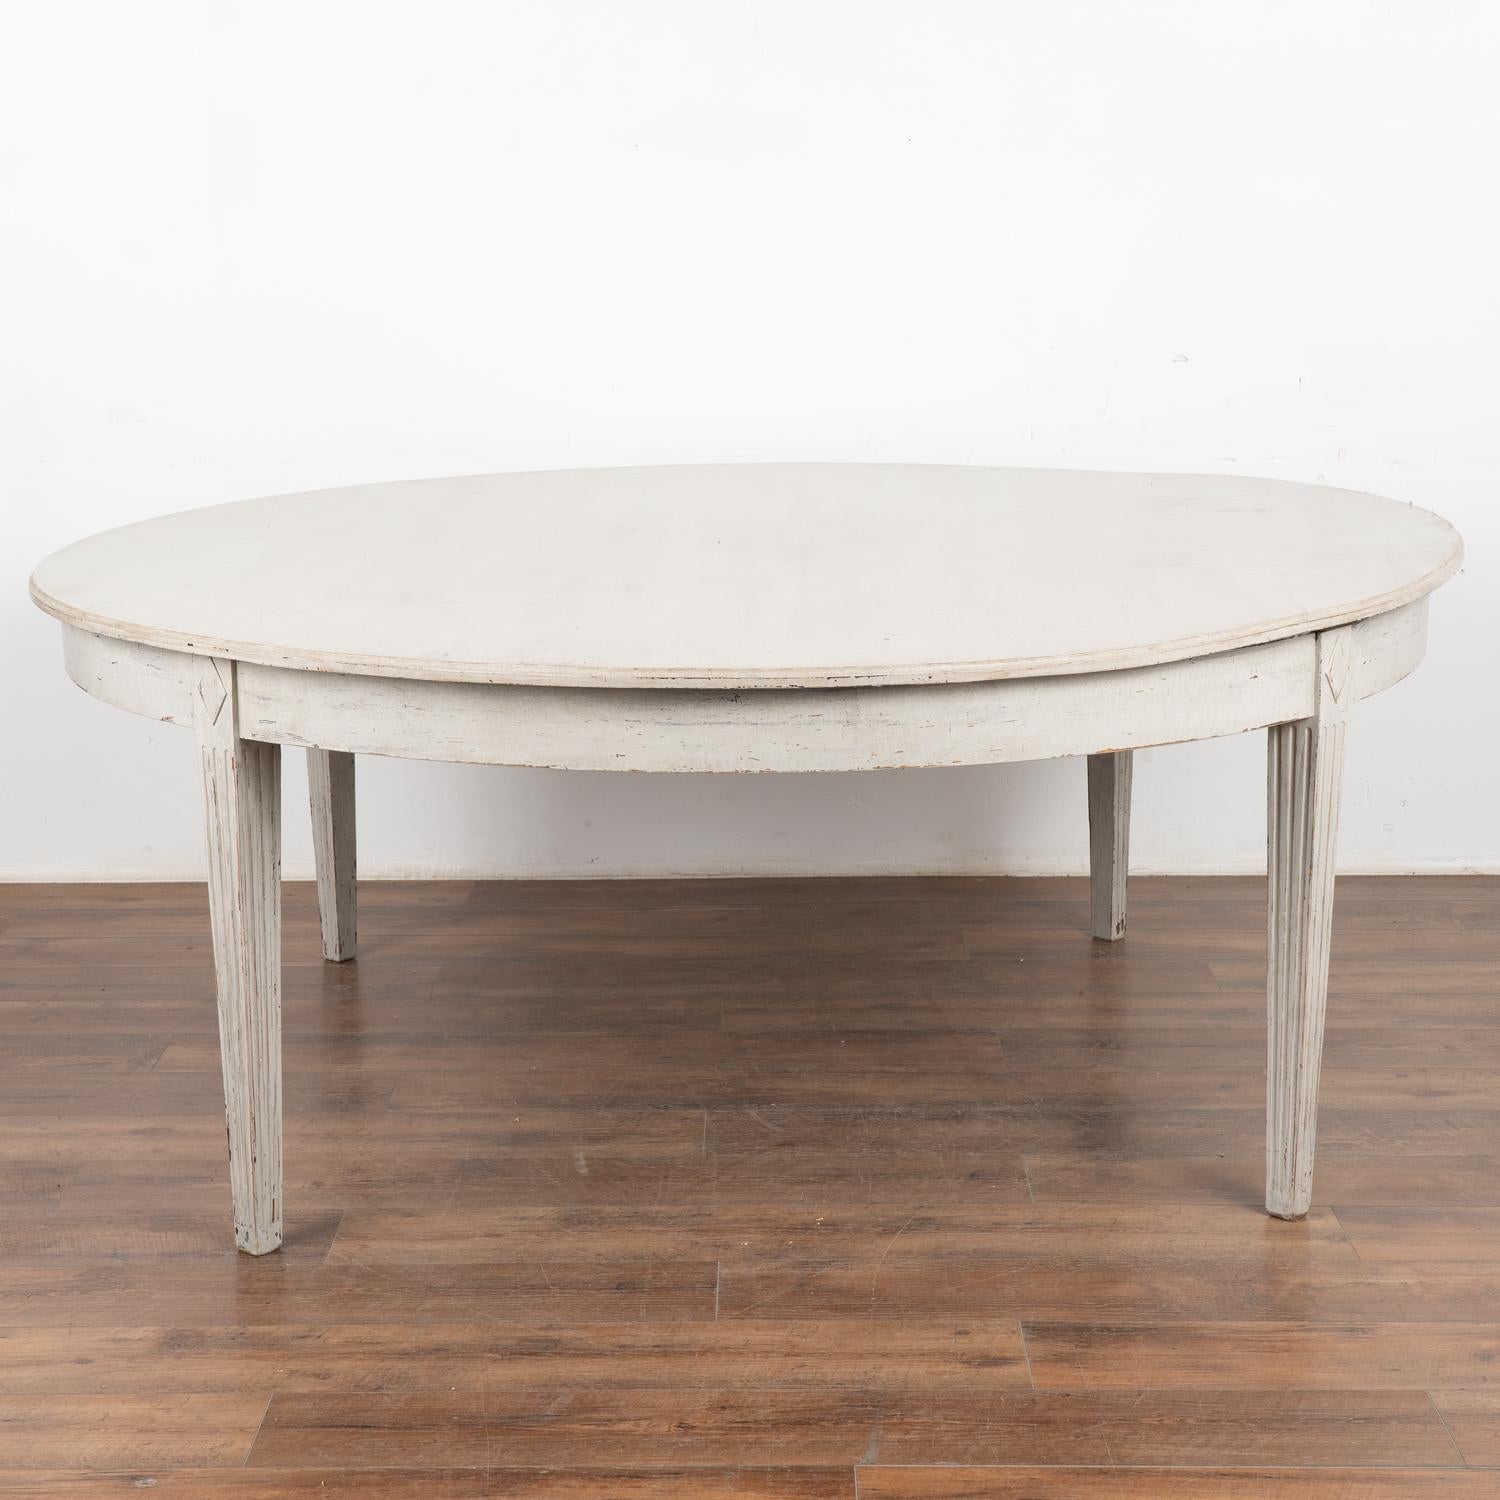 Round dining table, 6.5' diameter with the look of the Gustavian style.
This size table did not exist in the Gustavian period; this new table mirrors the Swedish style in a larger size for today's modern home.
Lovely tapered fluted legs and applied